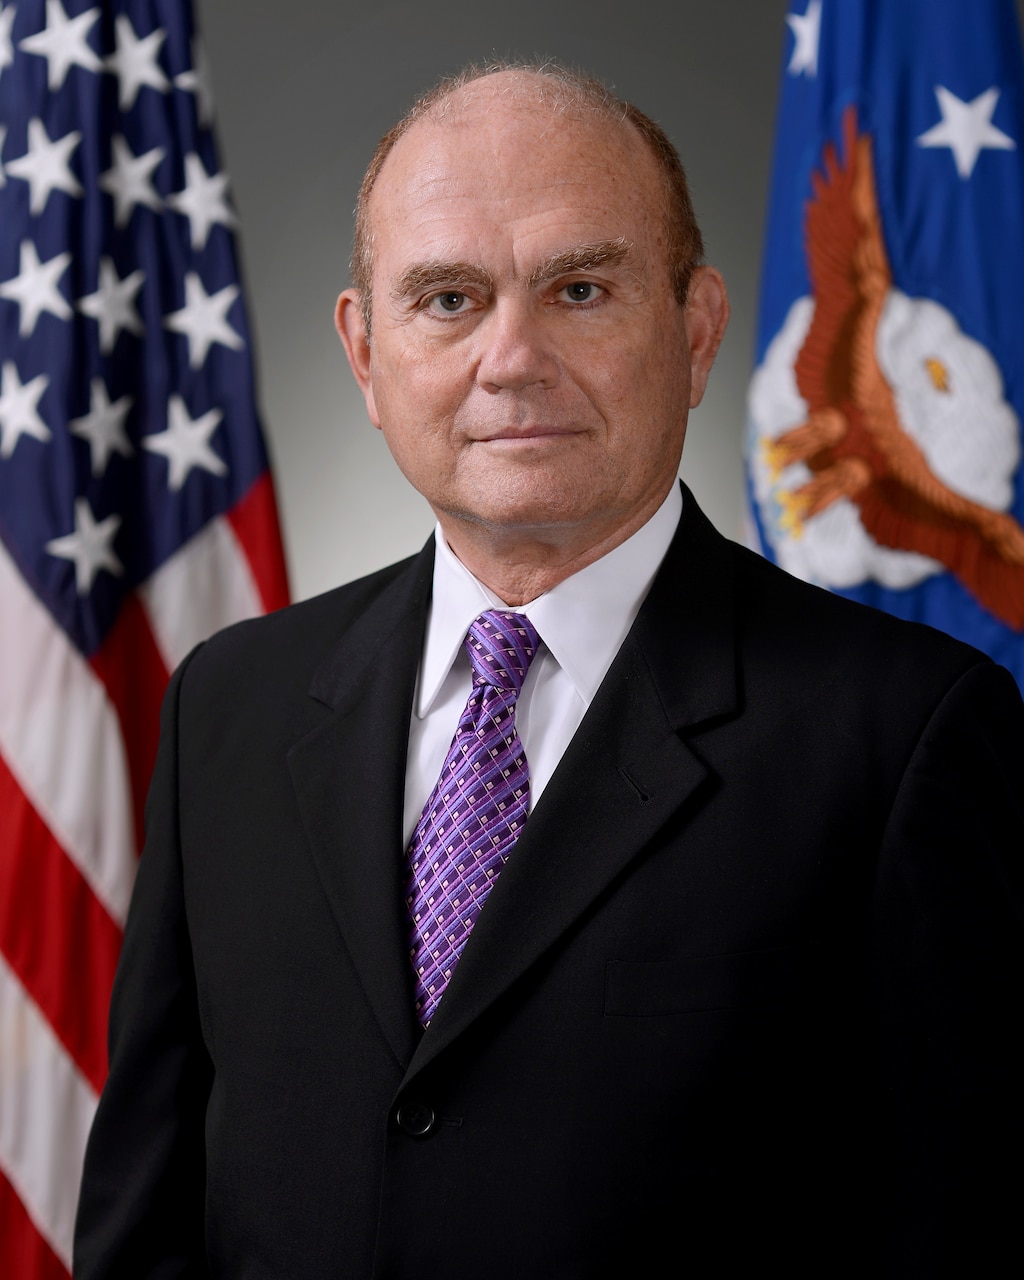 During an interview with DoD News, Air Force General Counsel Gordon O. Tanner, pictured, discussed DoD’s LGBT Pride Month, the importance of recognizing diversity within the department and encouraging LGB service members and LGBT civilians to visibly serve. U.S. Air Force photo